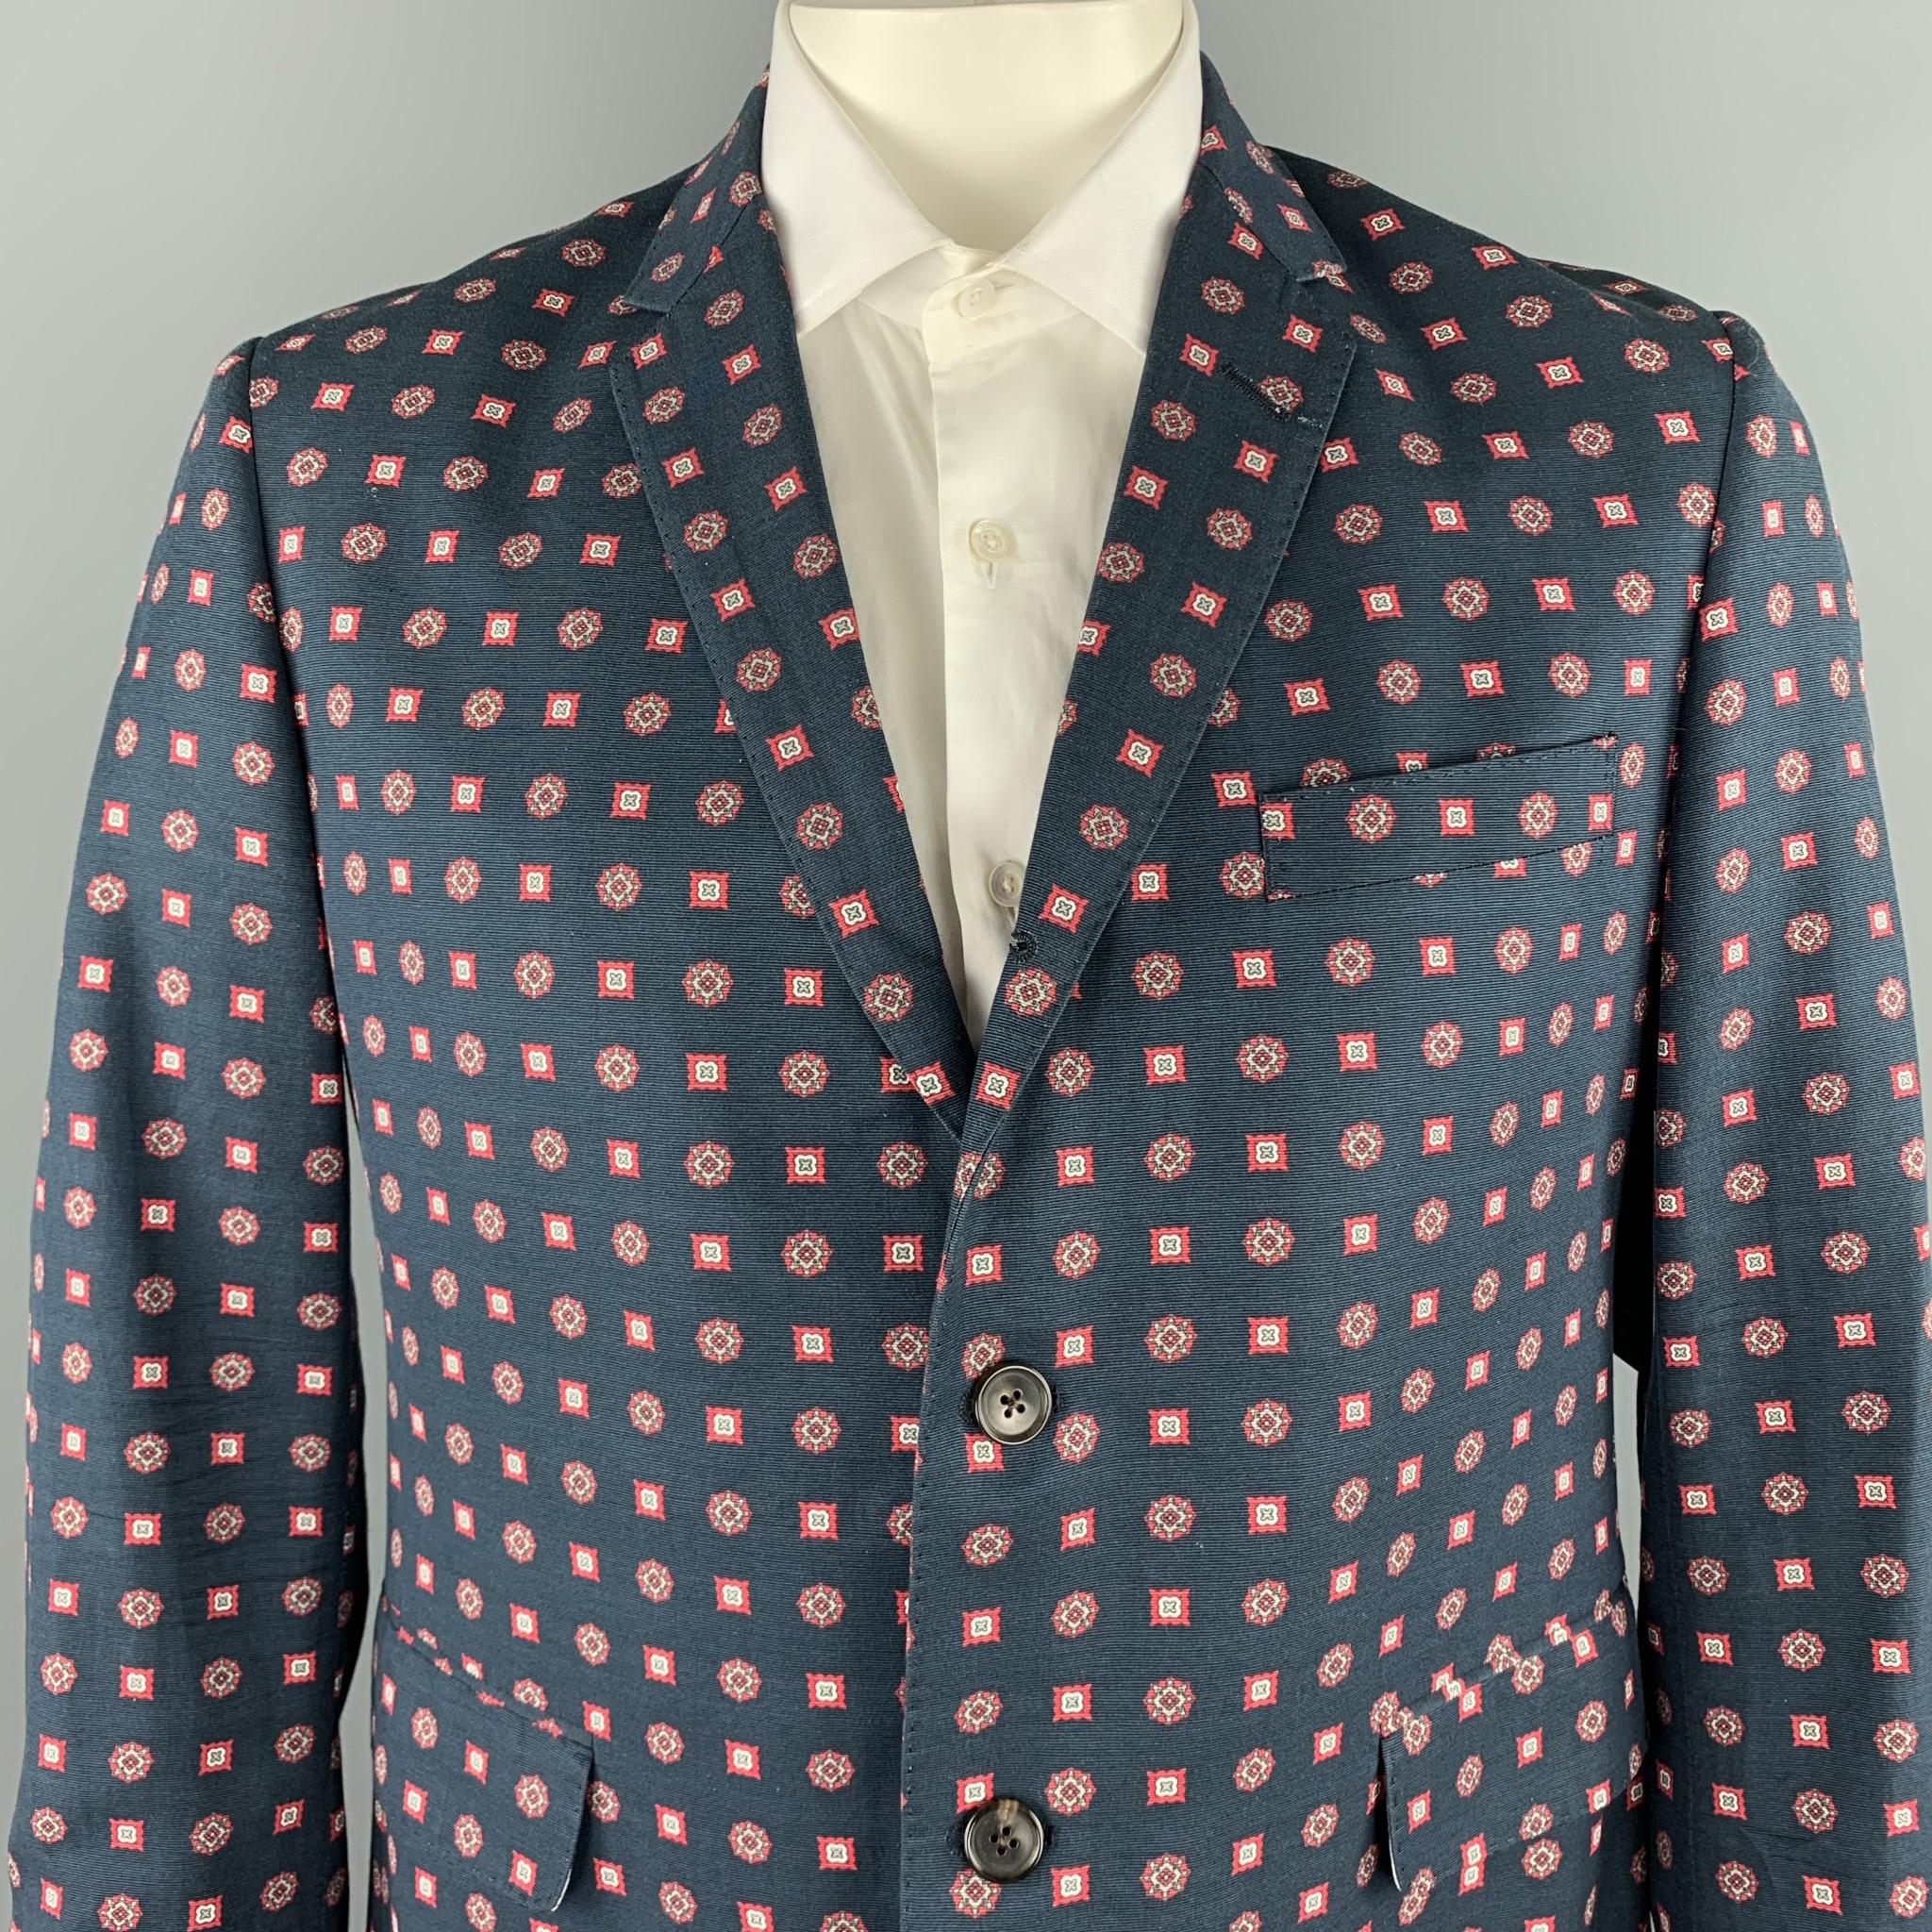 BLACK FLEECE sport coat comes in a navy print cotton / viscose with a stripe liner featuring a notch lapel, flap pockets, and a three button closure. 

Very Good Pre-Owned Condition.
Marked: BB3

Measurements:

Shoulder: 18 in. 
Chest: 42 in. 